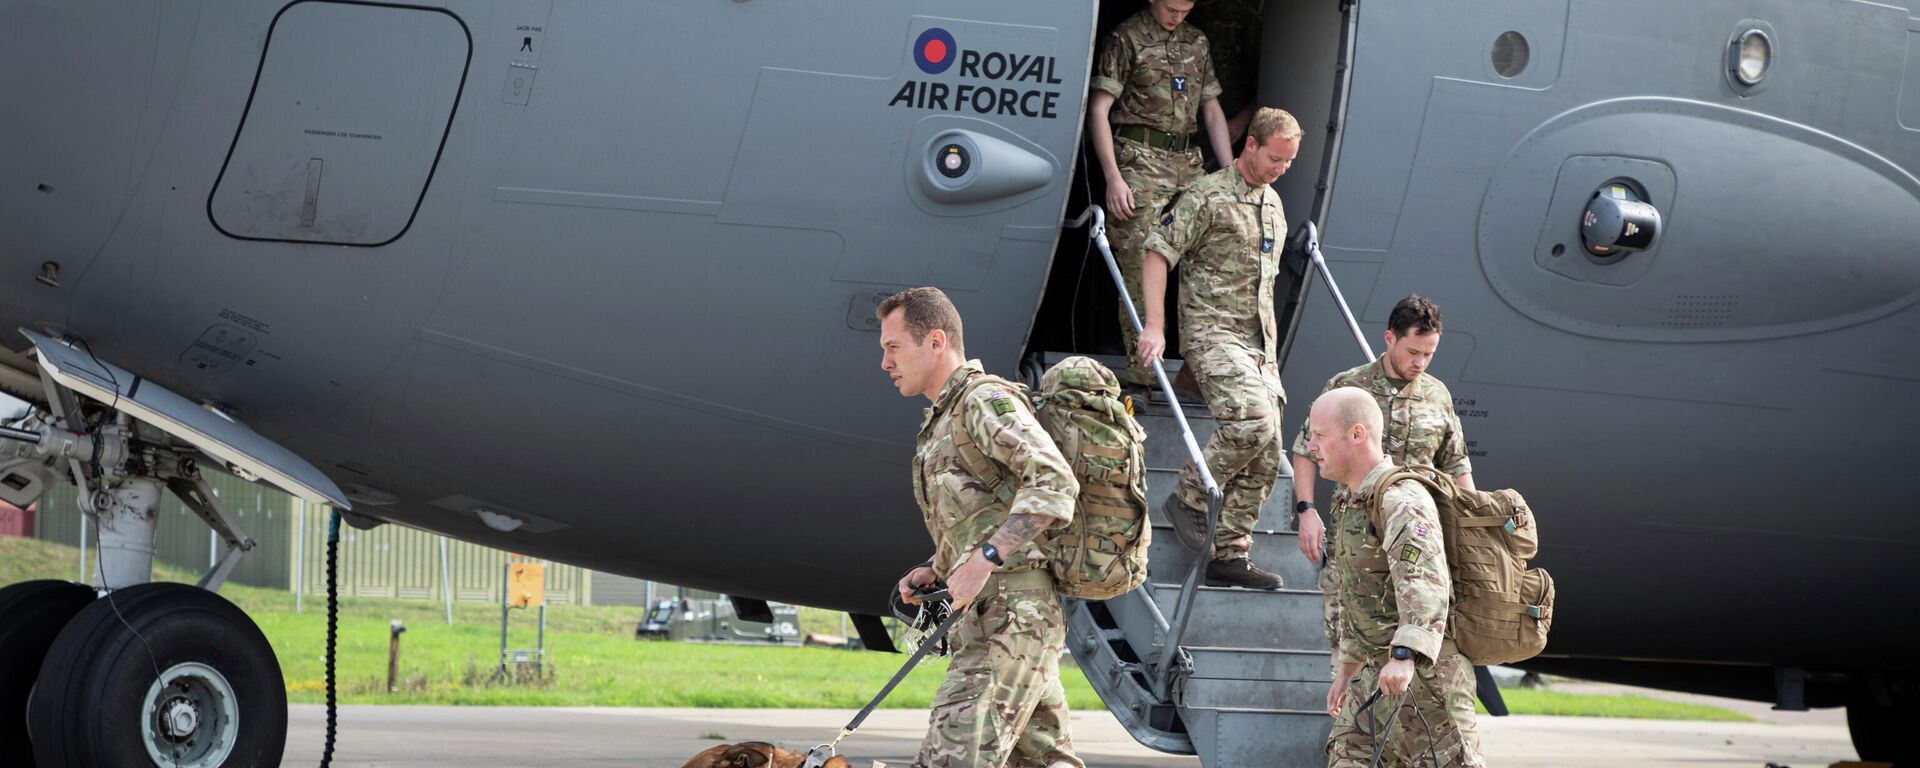 Military personnel and military dogs arrive at RAF Brize Norton base after being evacuated from Afghanistan, in Oxfordshire, Britain August 29, 2021 - Sputnik International, 1920, 17.09.2021